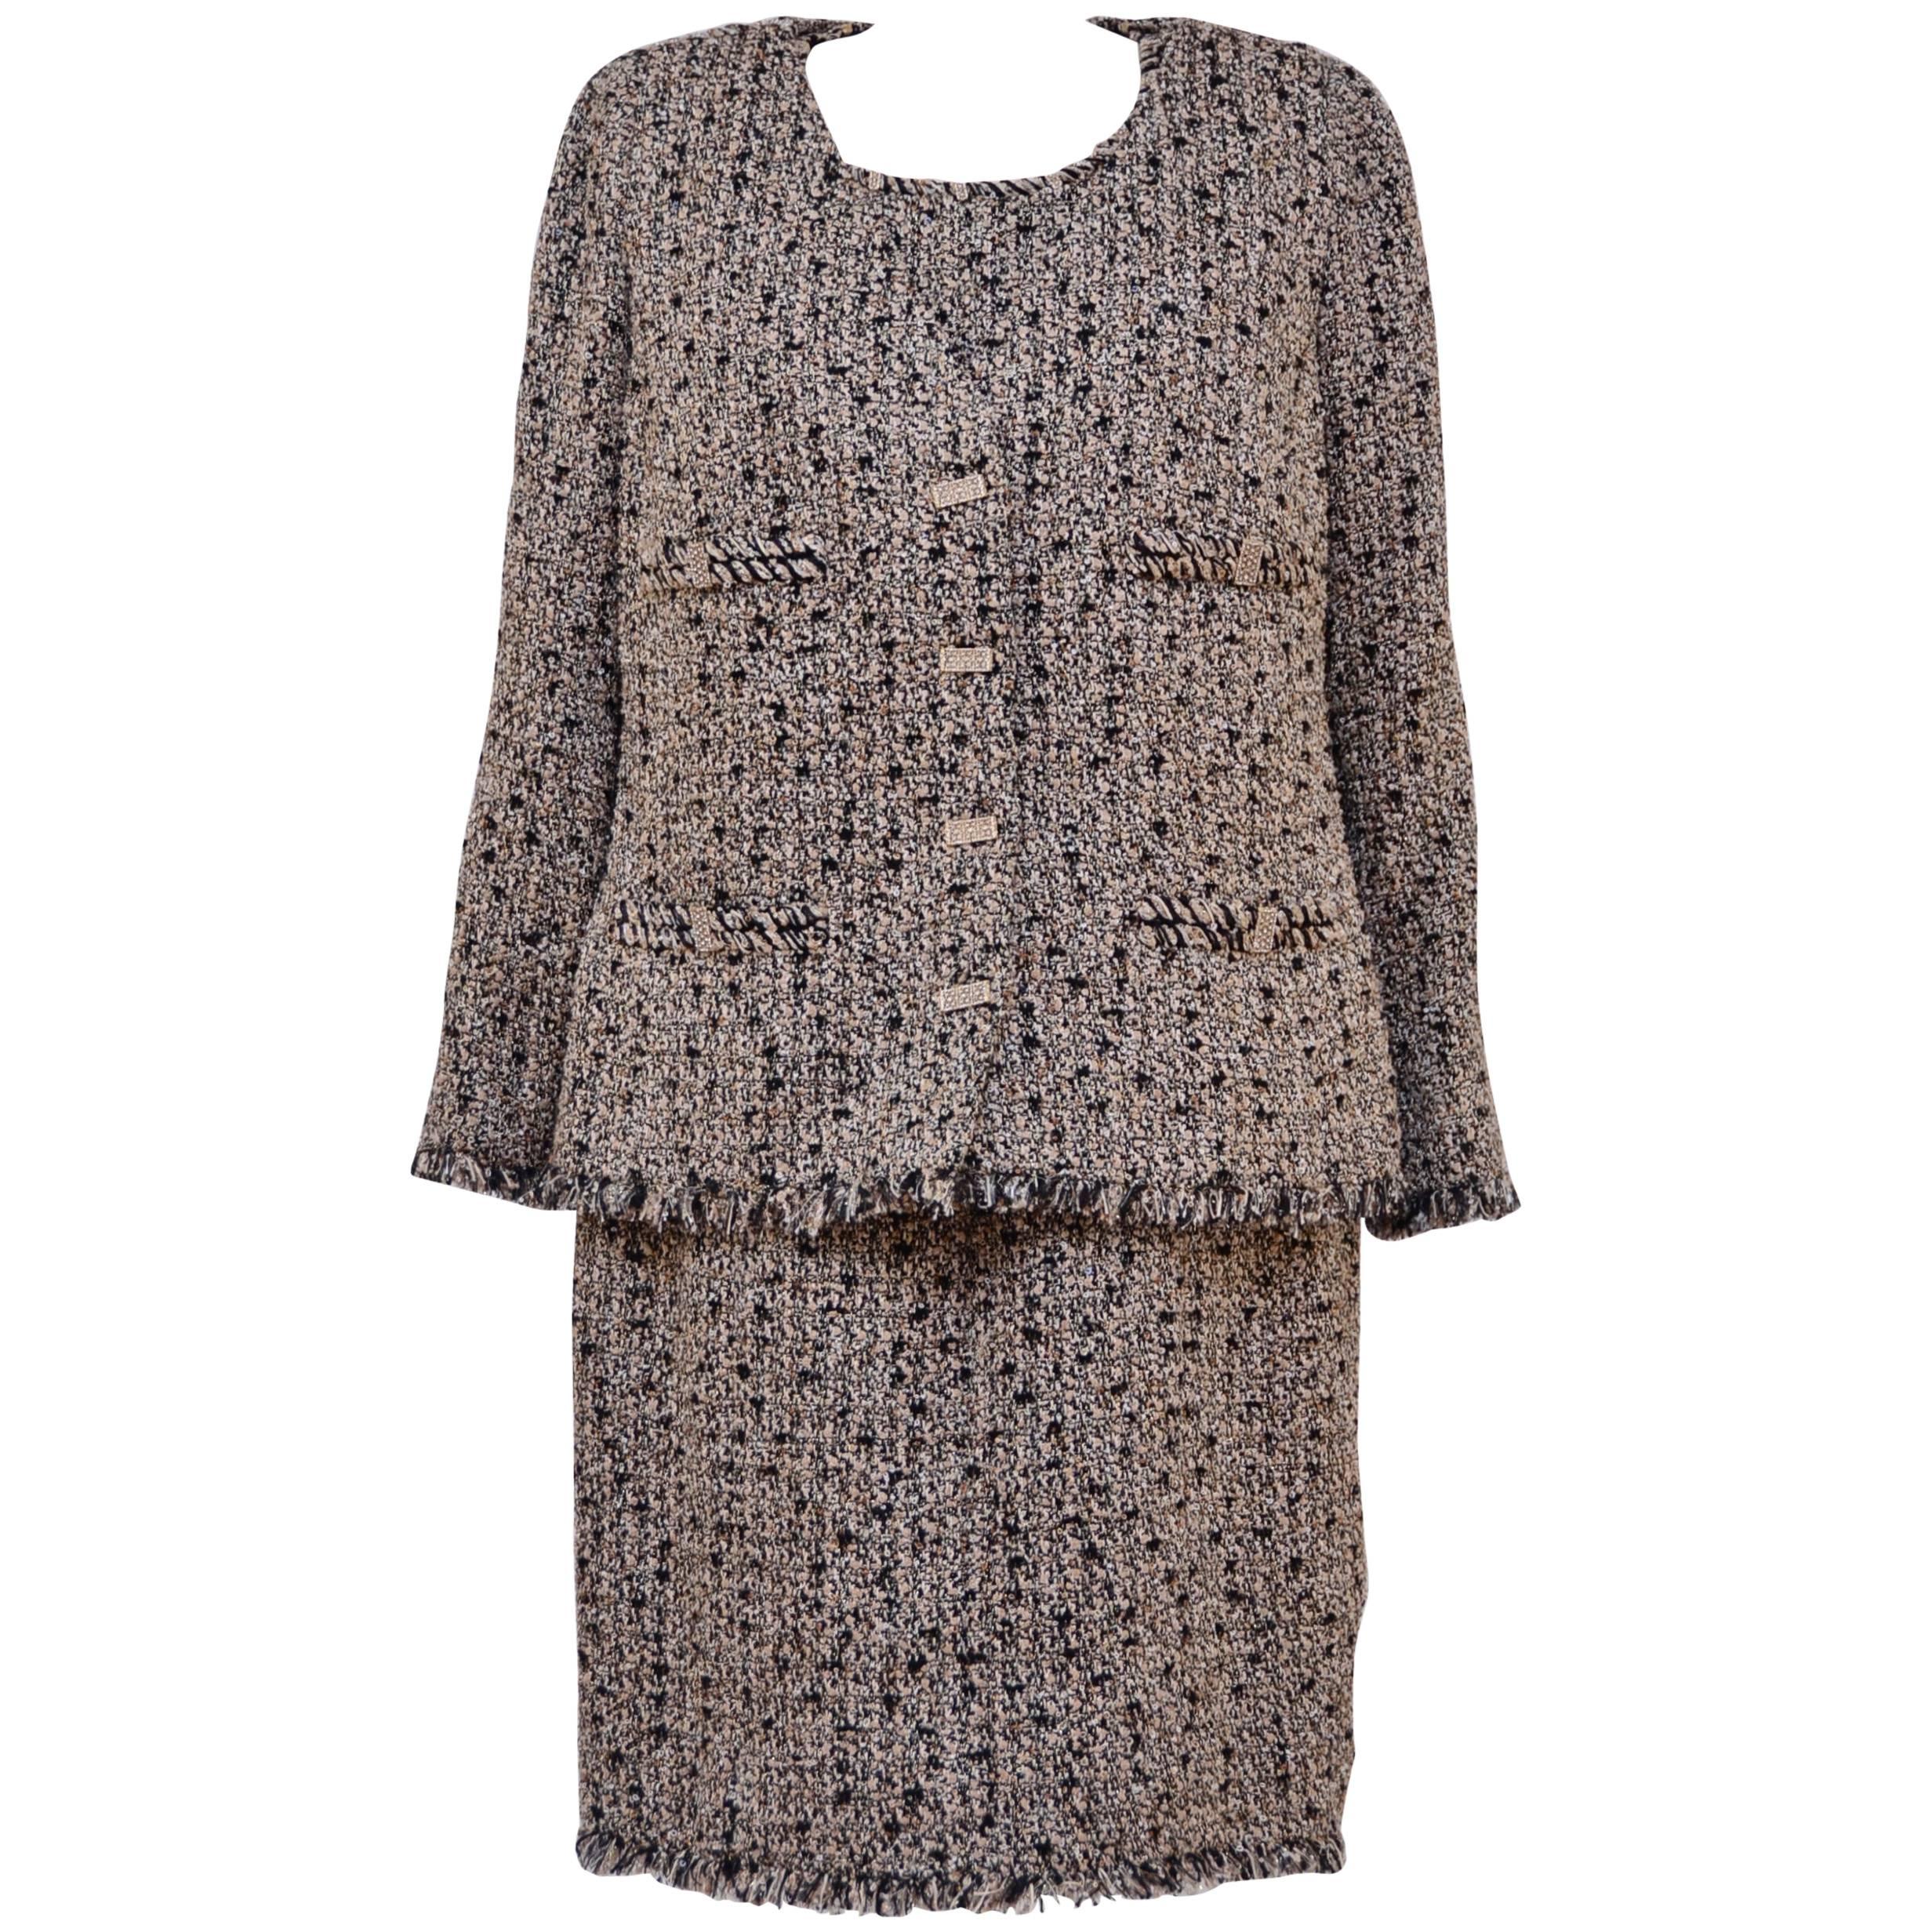 CHANEL Haute Couture Tweed Dress With Matching Jacket   Beautiful.....